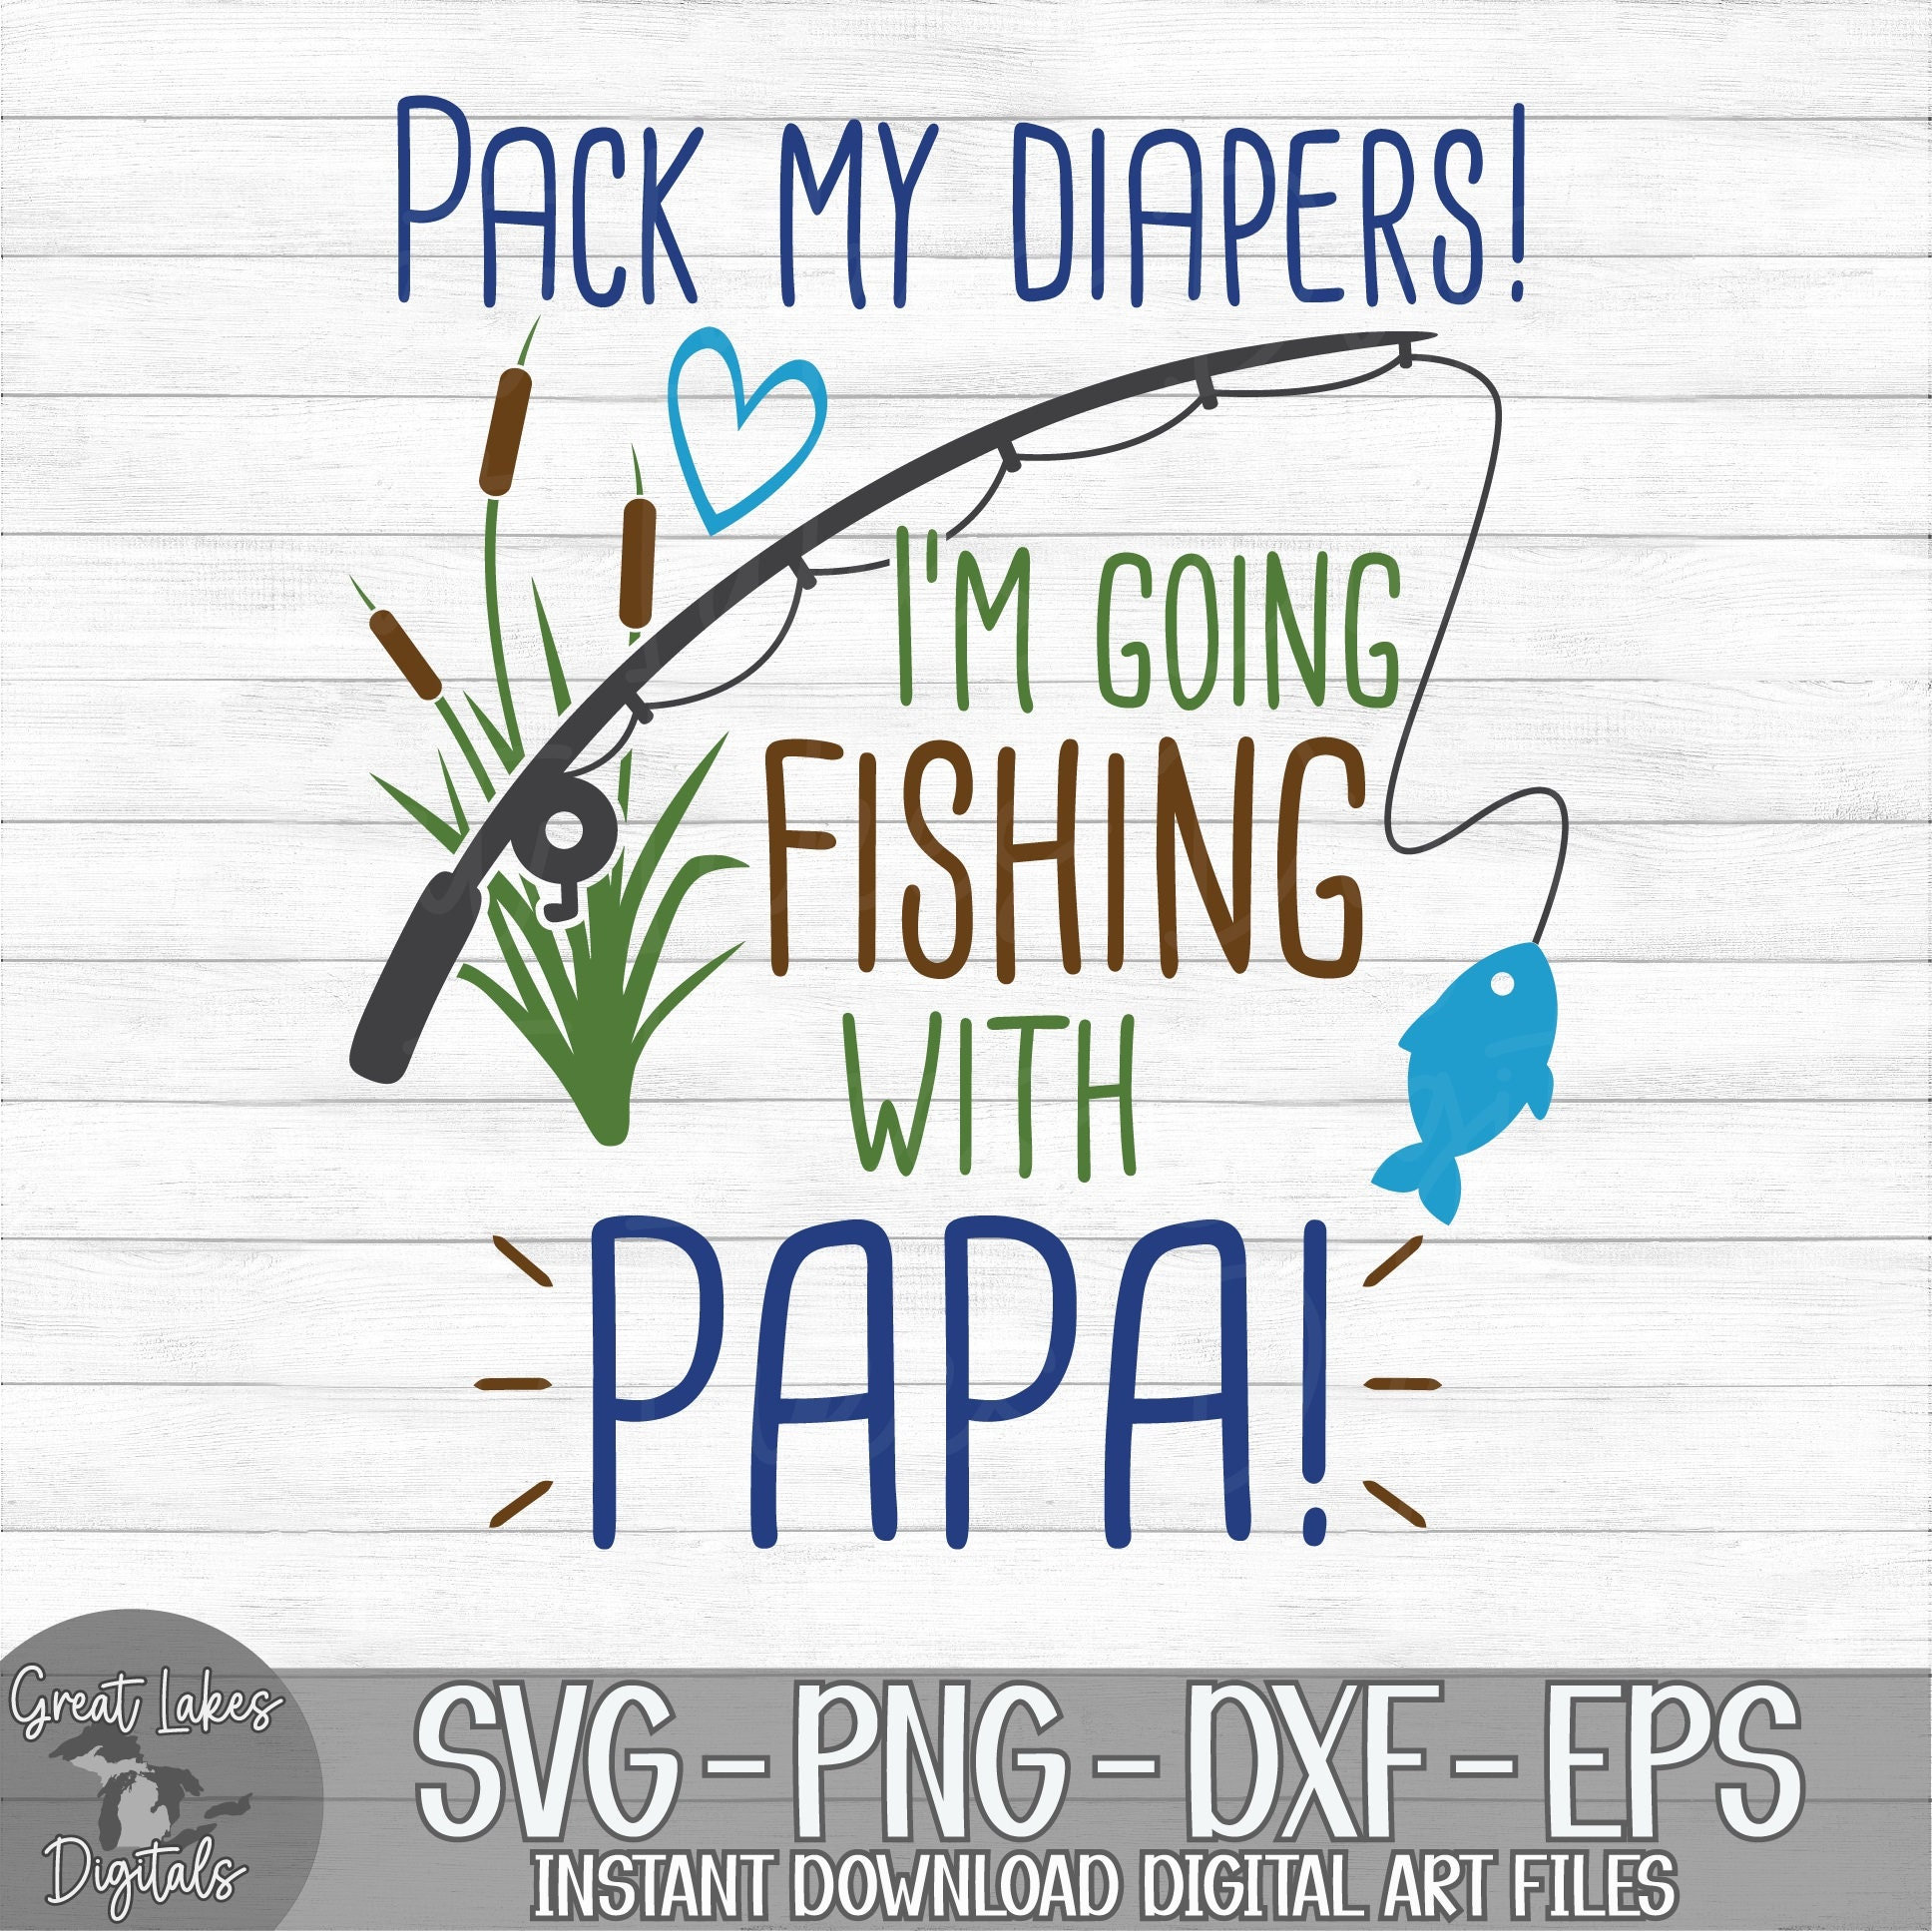 Pack My Diapers I'm Going Fishing With Papa Instant Digital